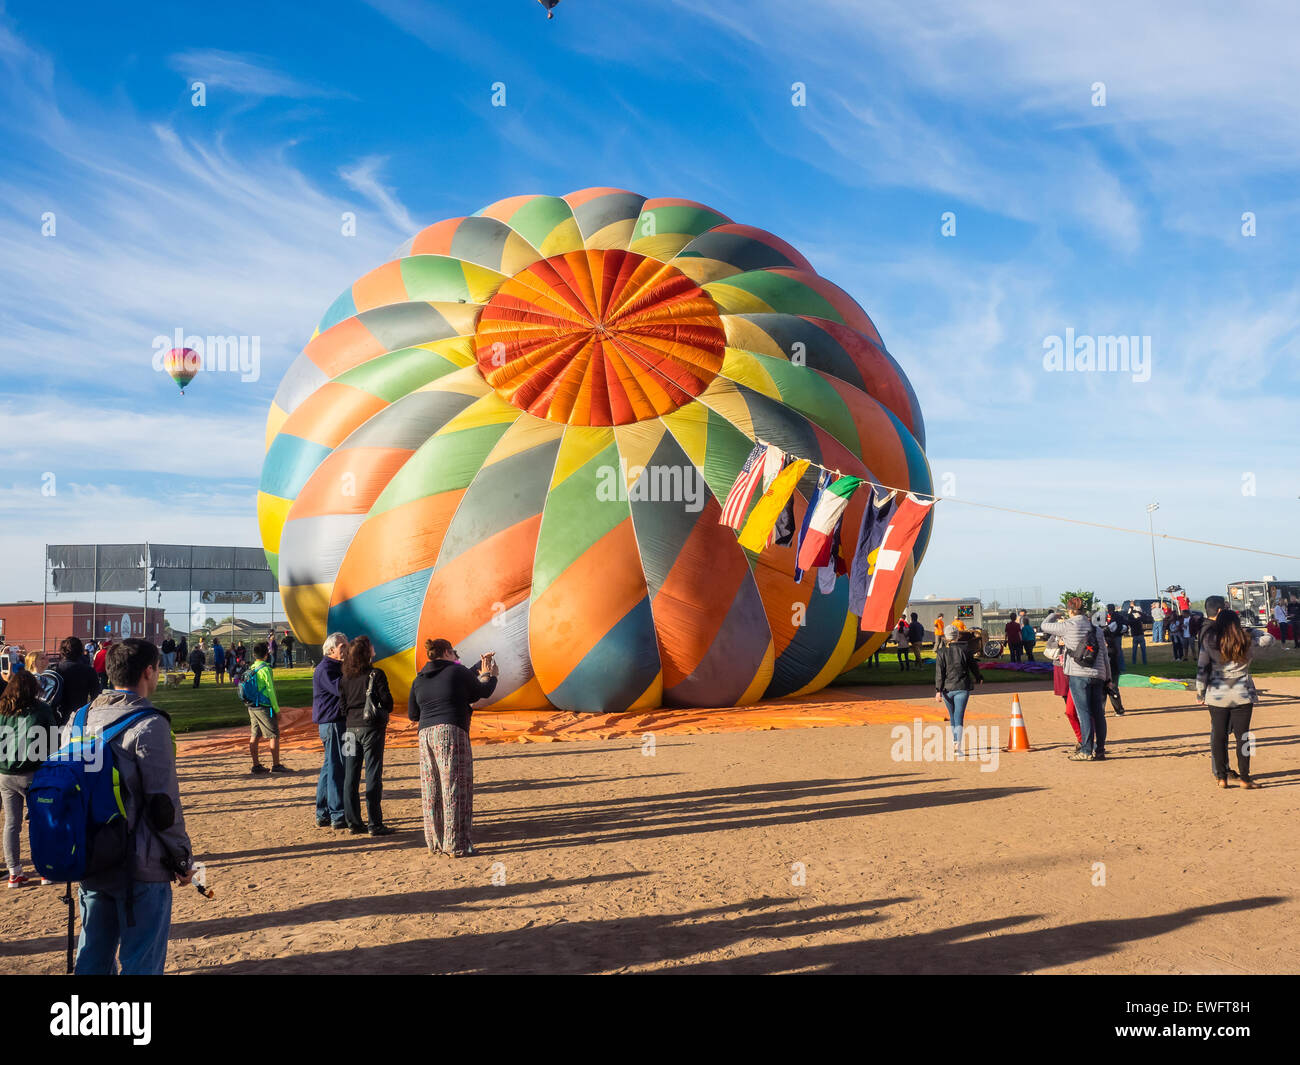 WINDSOR, CA/USA - June 20, 2015: 25th Annual Sonoma County Hot Air Balloon Classic is a yearly event where you can experience ba Stock Photo